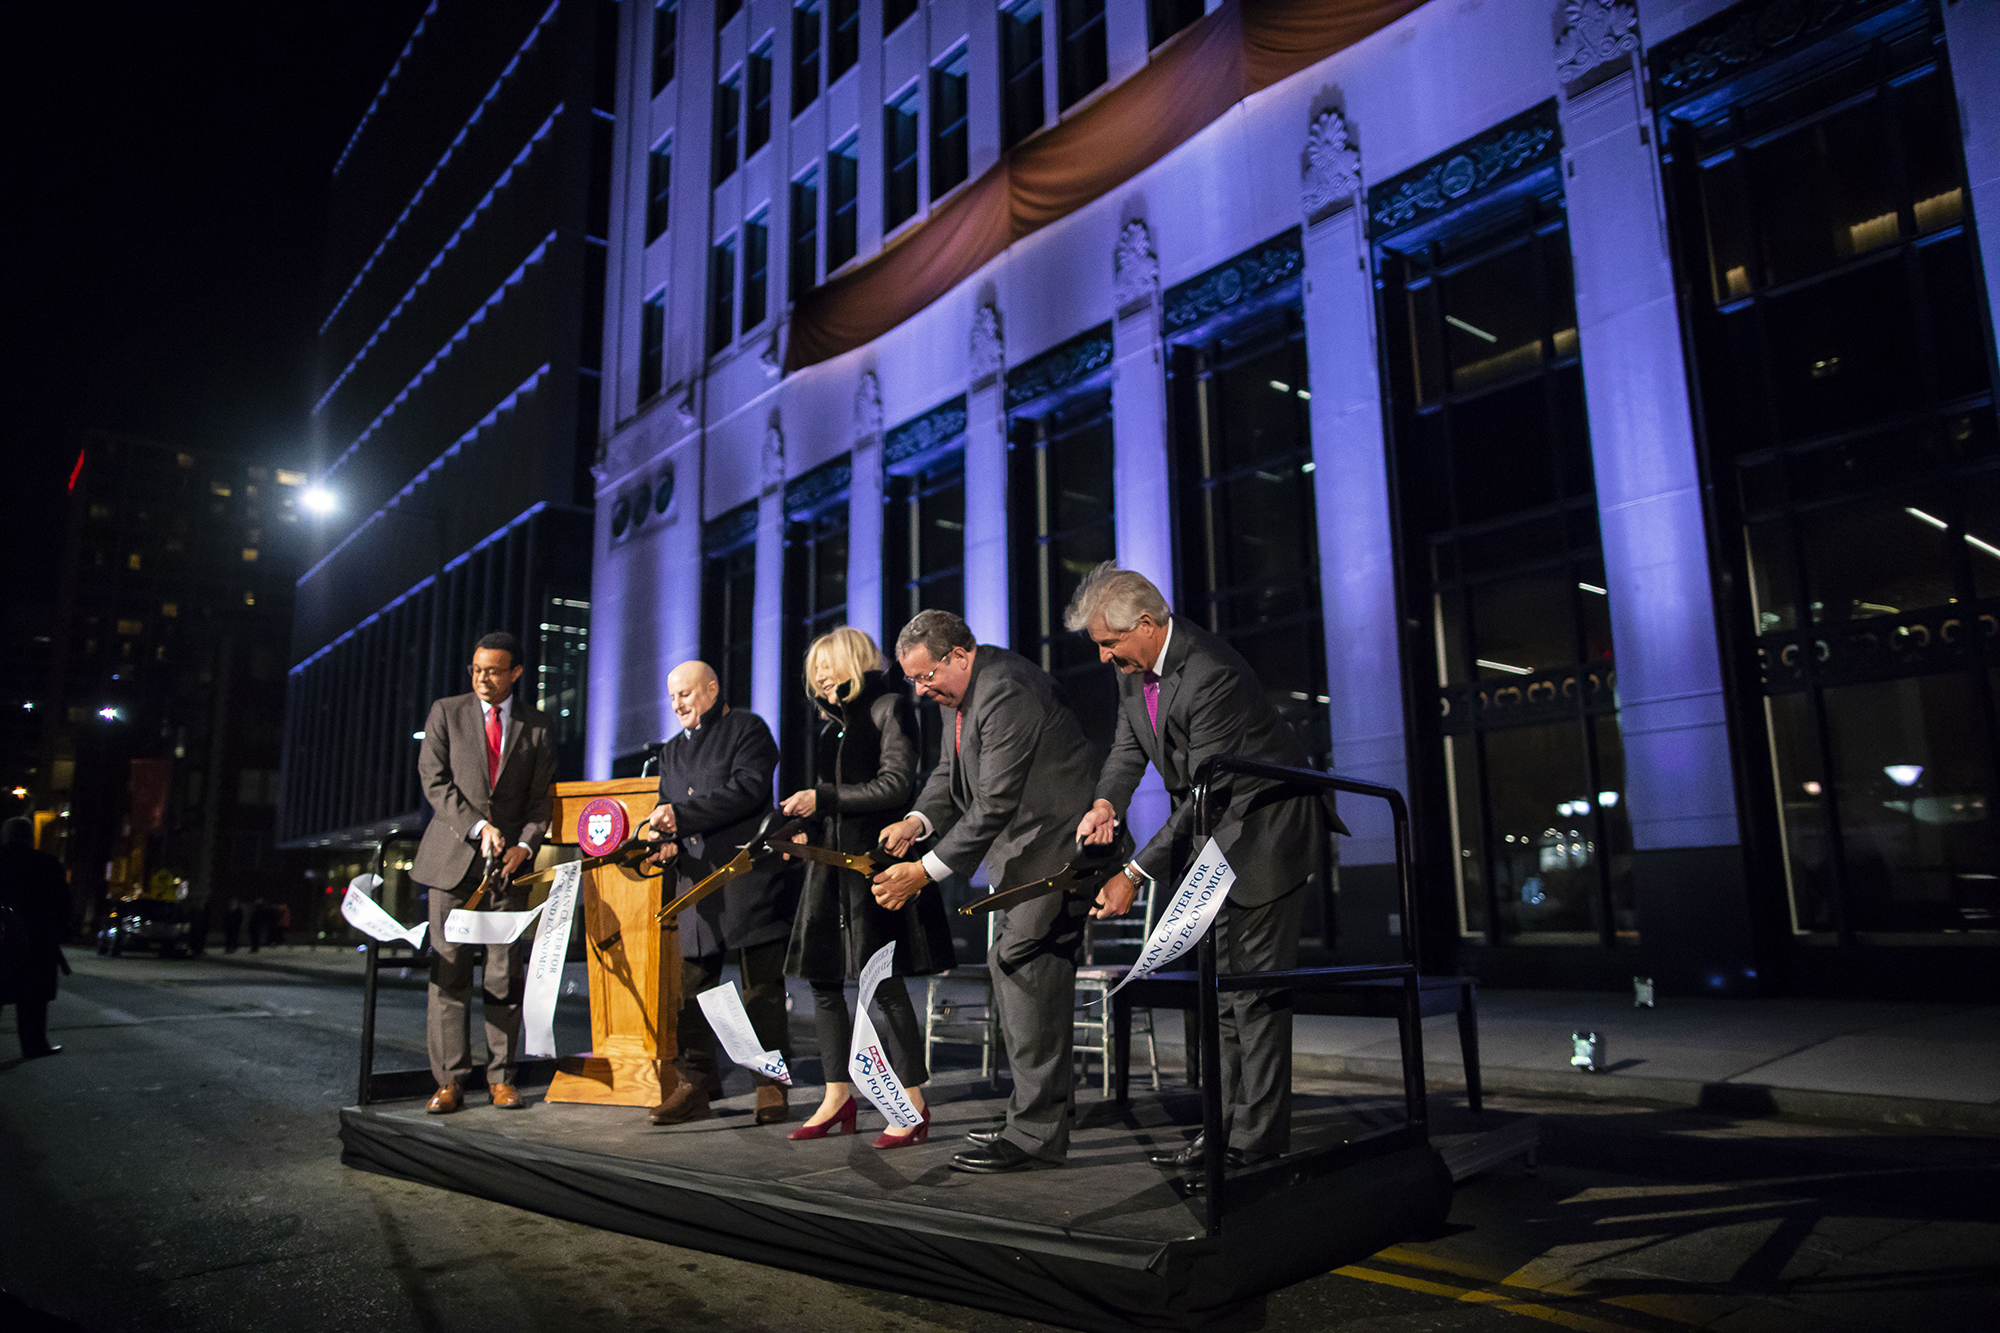 Five people, including Wendell Pritchett, Steve Fluharty, and Amy Gutann, cut a ribbon on a small platform with a podium in front of the new Perelman building.